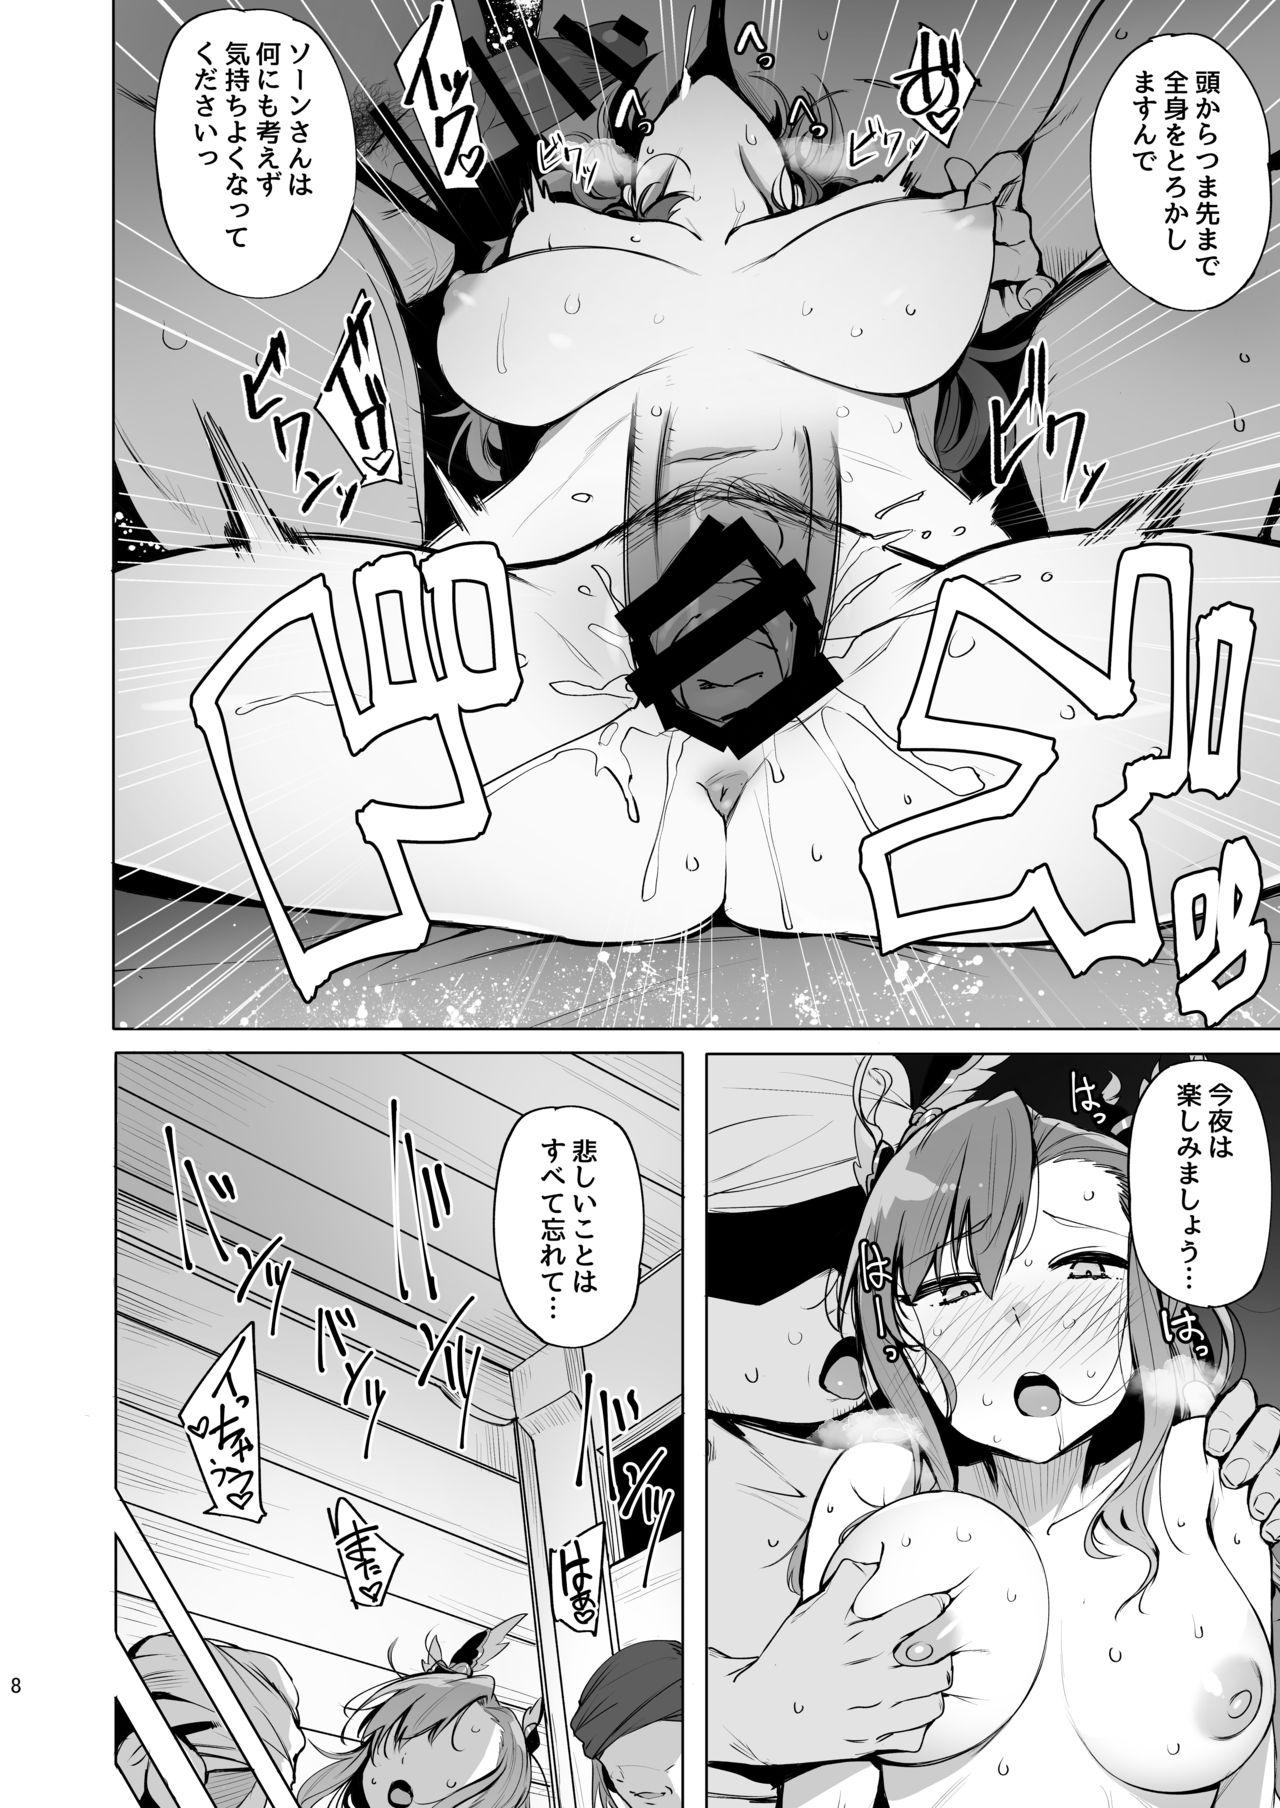 Lesbo Deep in the eyes - Granblue fantasy Hardcore Fuck - Page 8